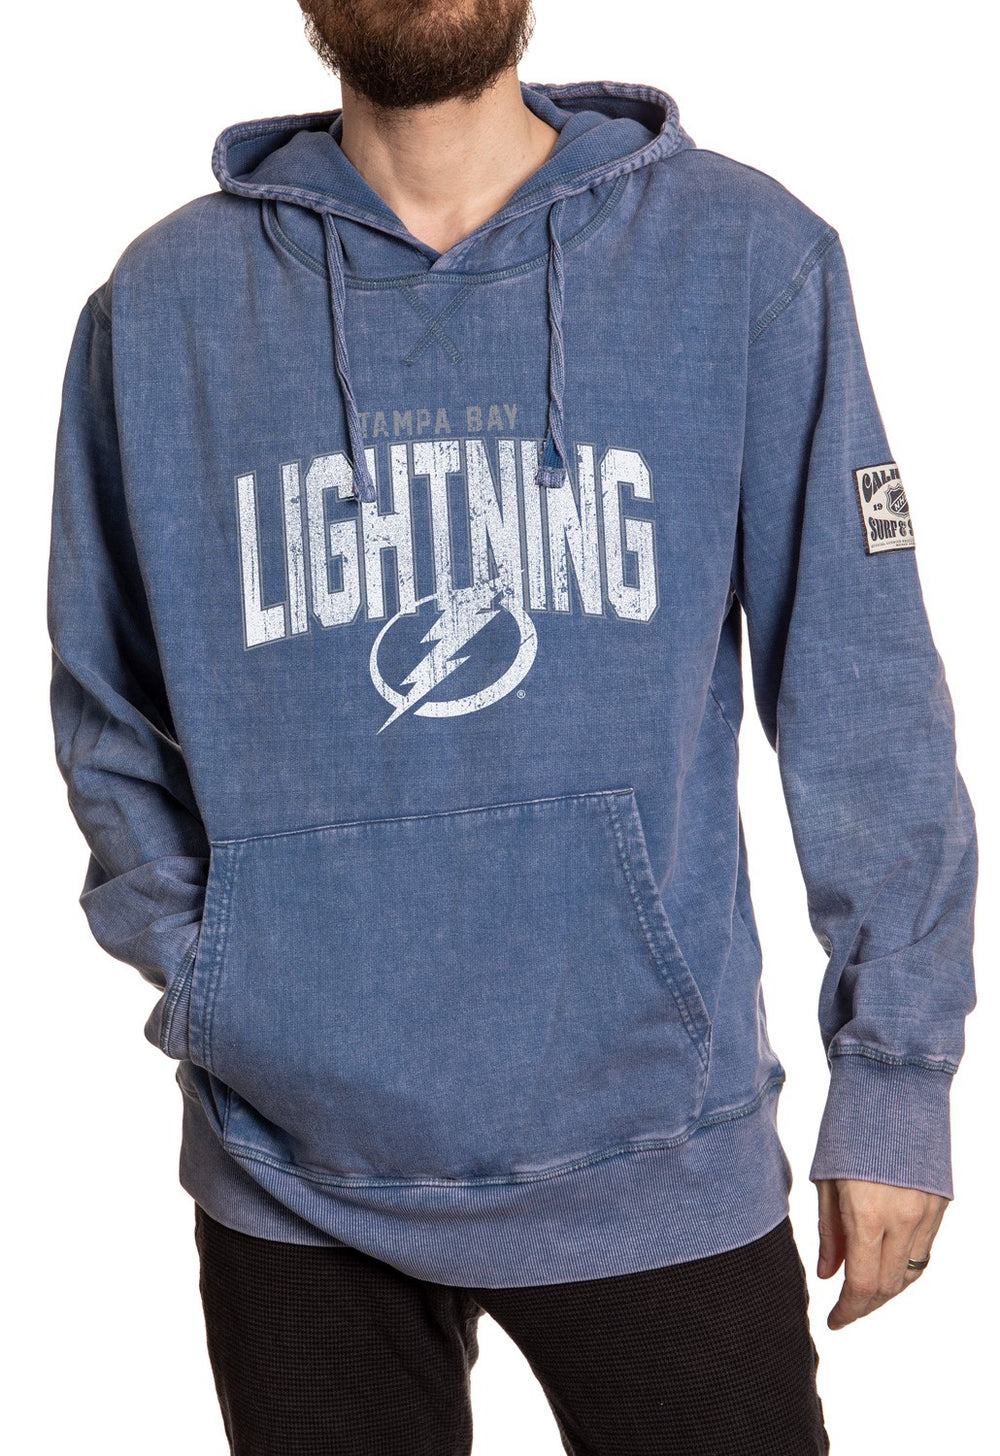 Tampa Bay Lightning Acid Wash Hoodie in Blue Front View